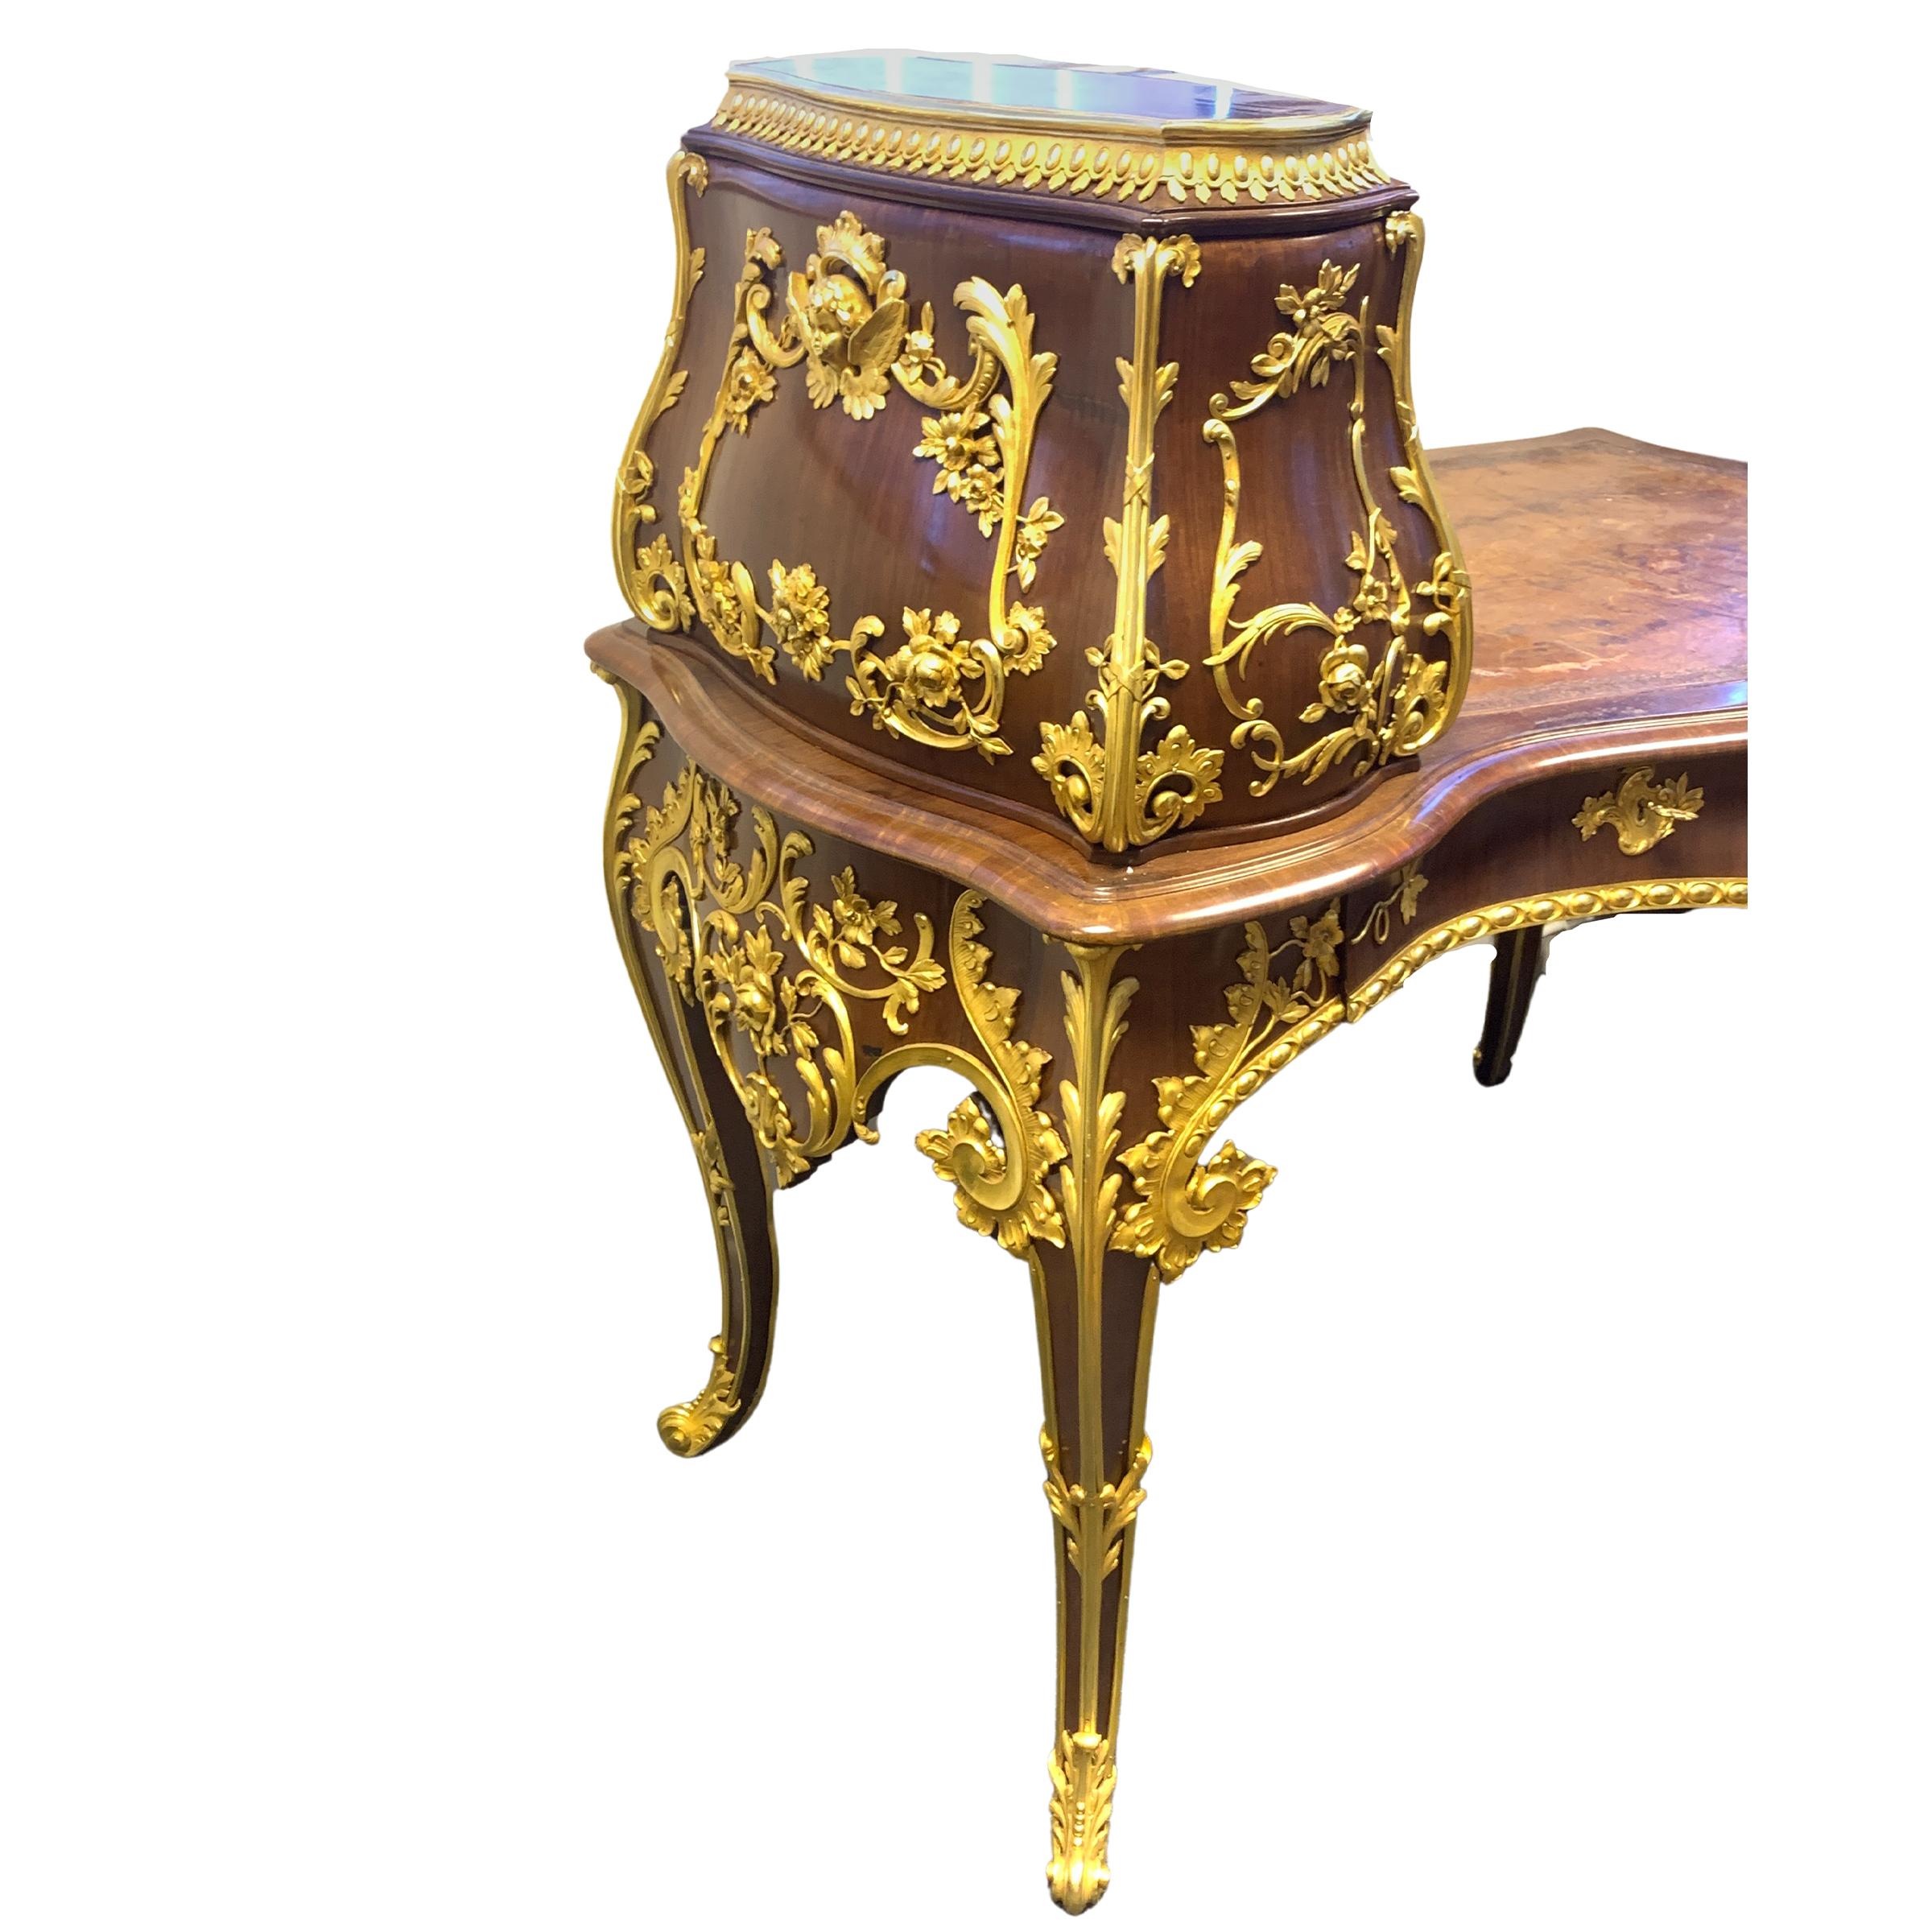 Fine Antique 19th Century Wood and Bronze Inlaid Desk In Good Condition For Sale In London, GB